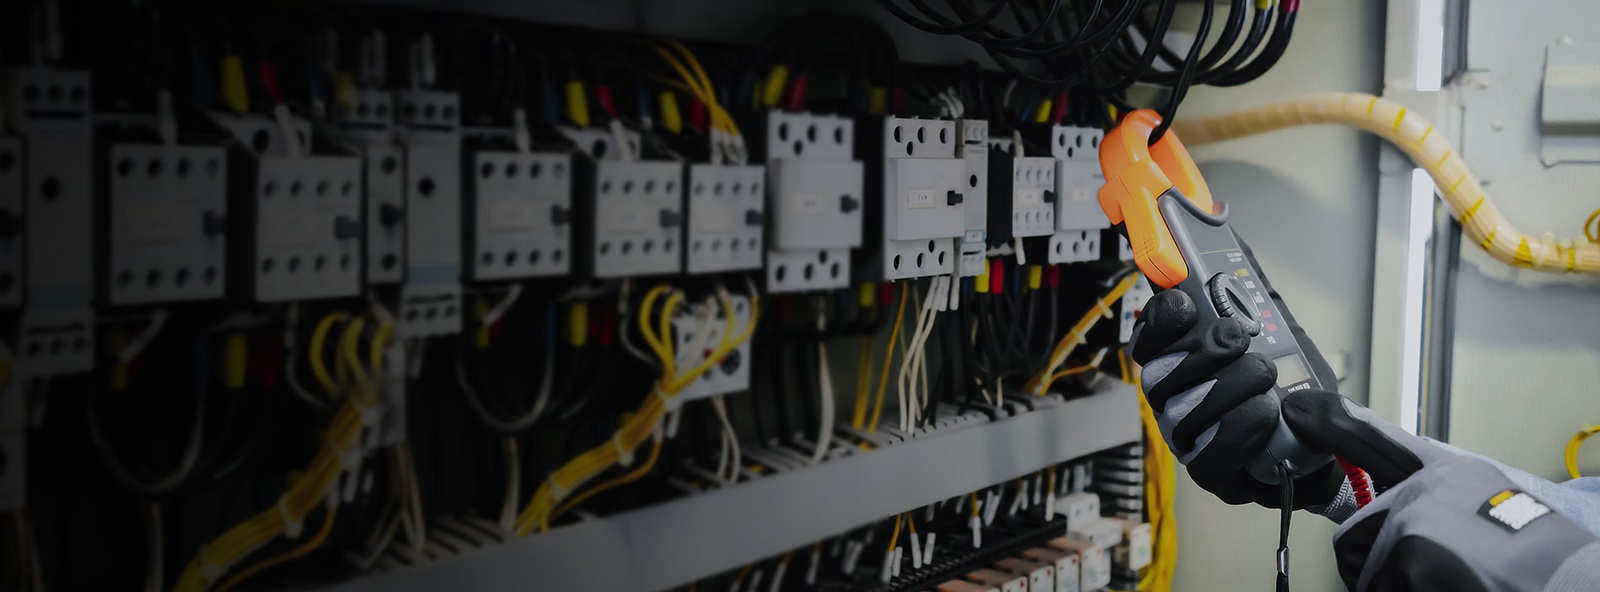 Our certified Electrical Inspectors offer top-notch electrical systems inspection services in Edmonton, AB